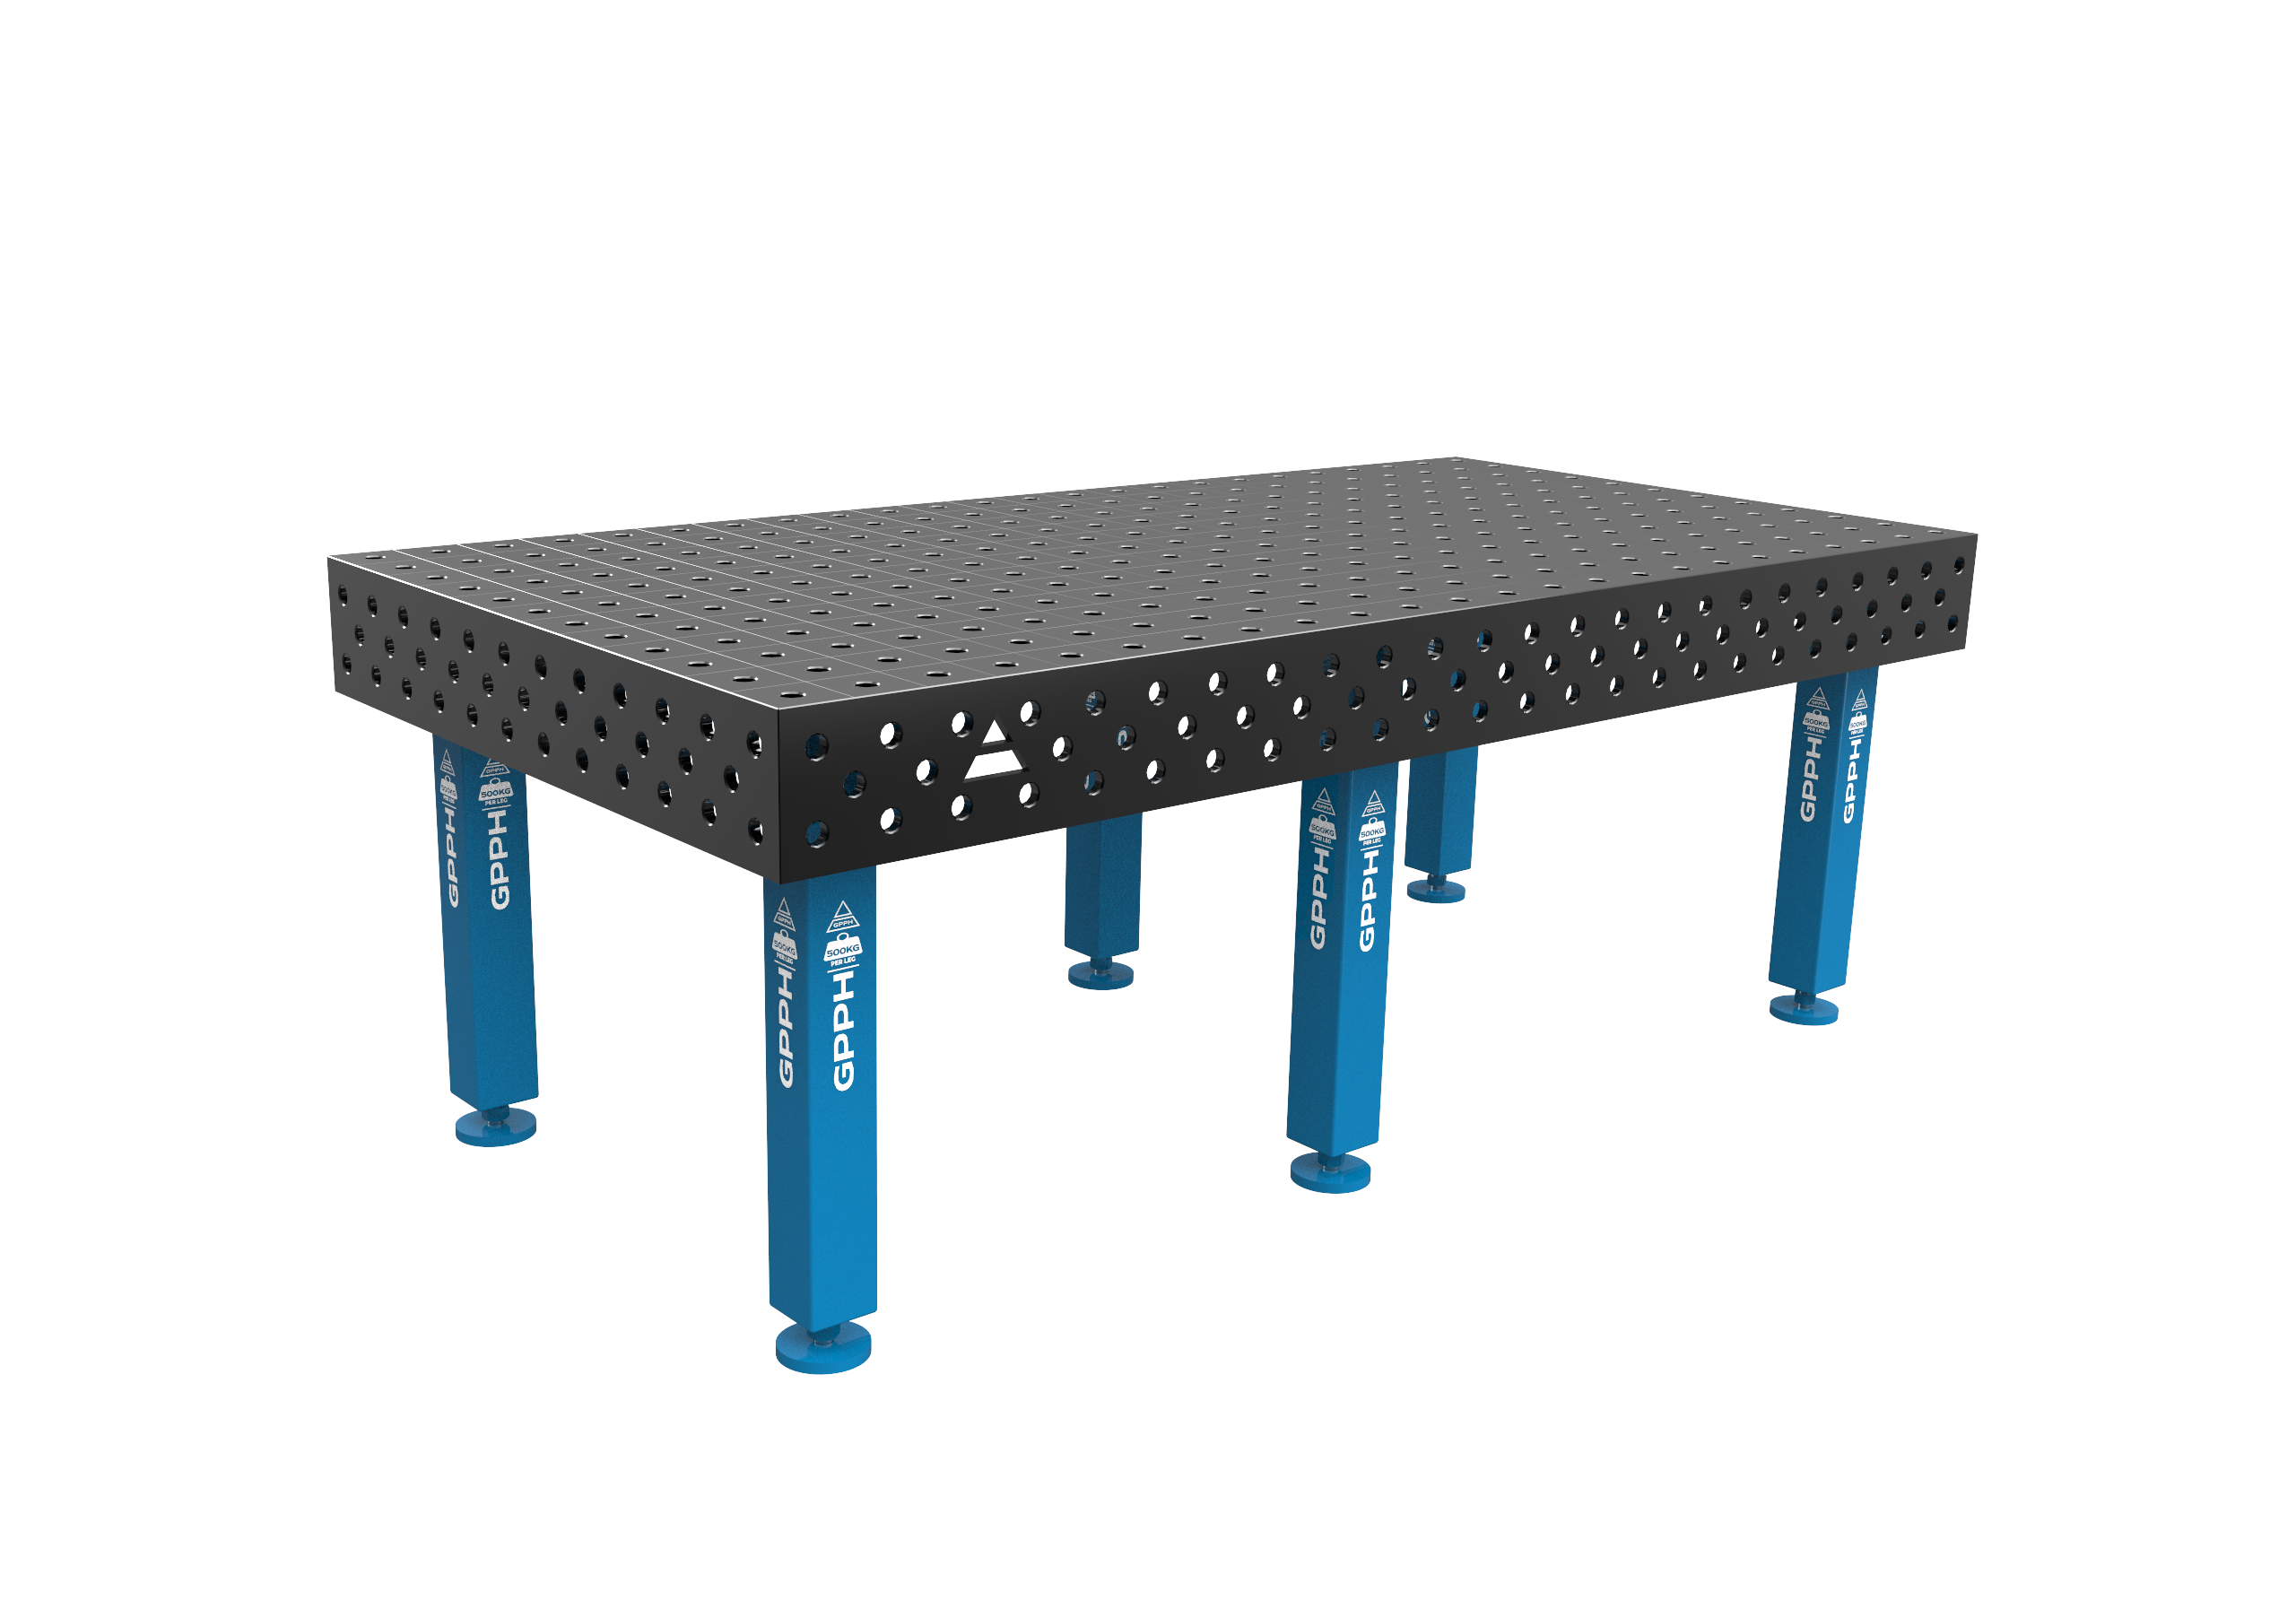 An image of a Welding Tables